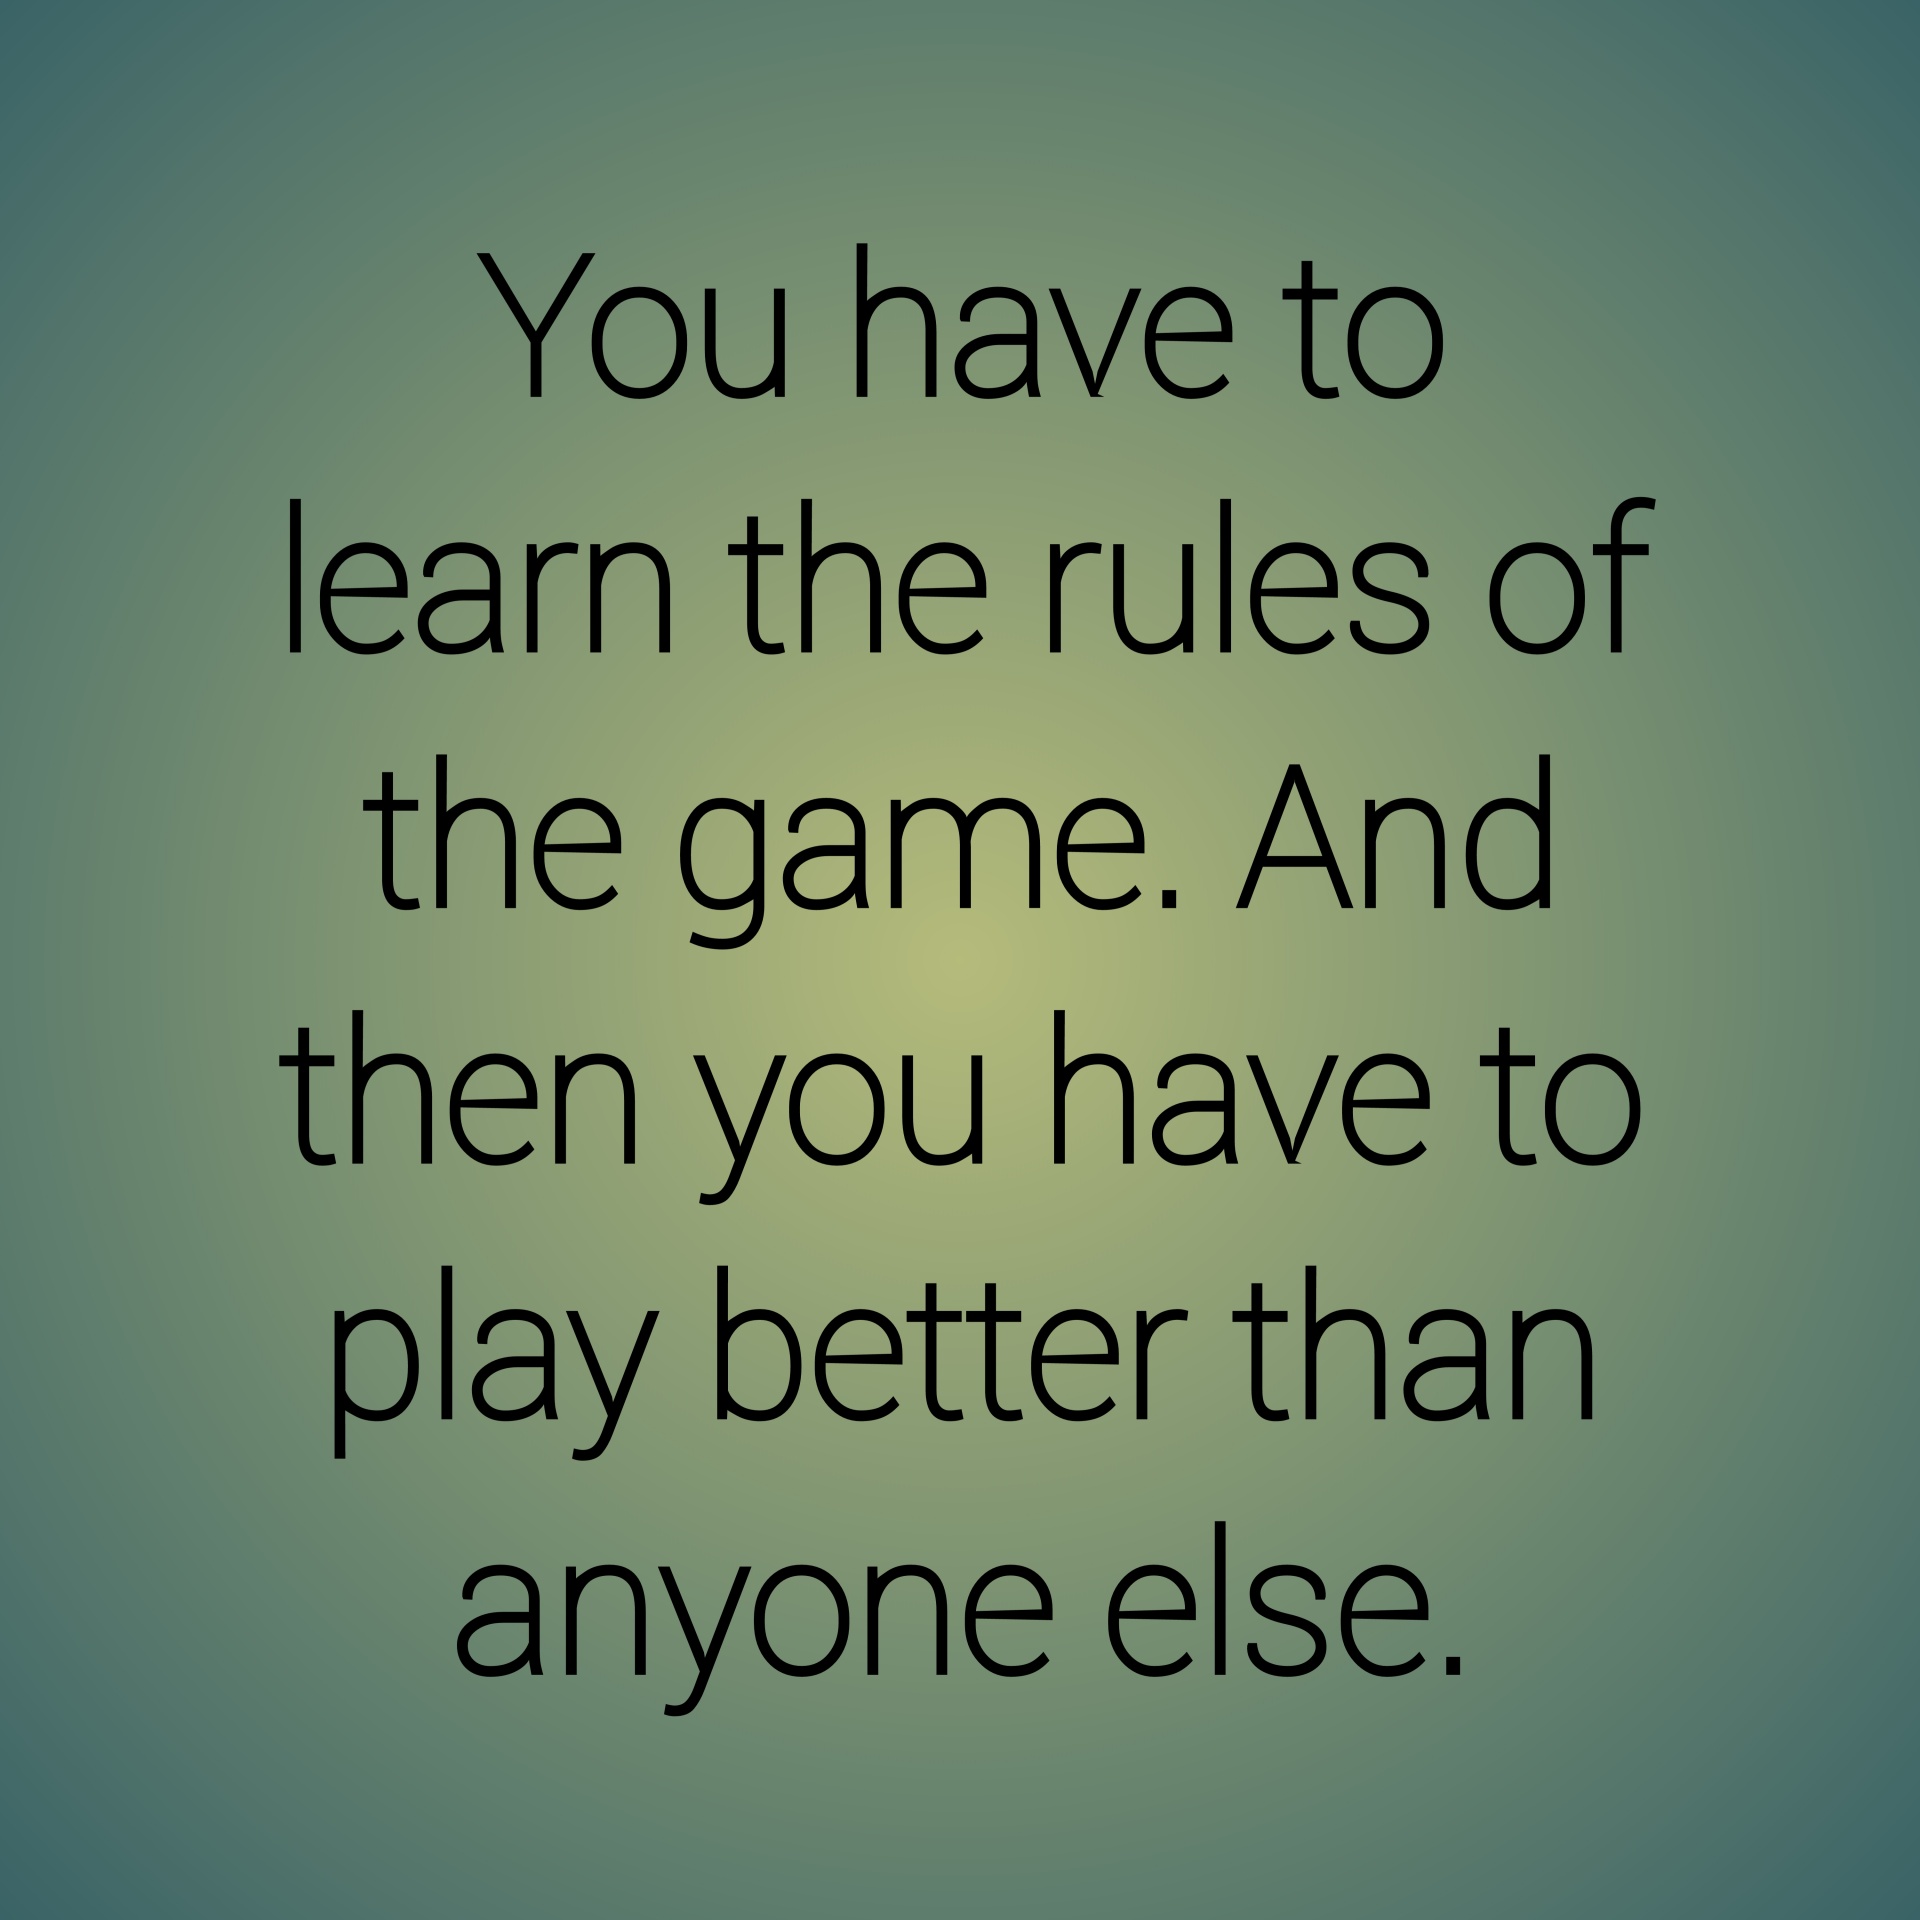 Quote On Rules Of The Game